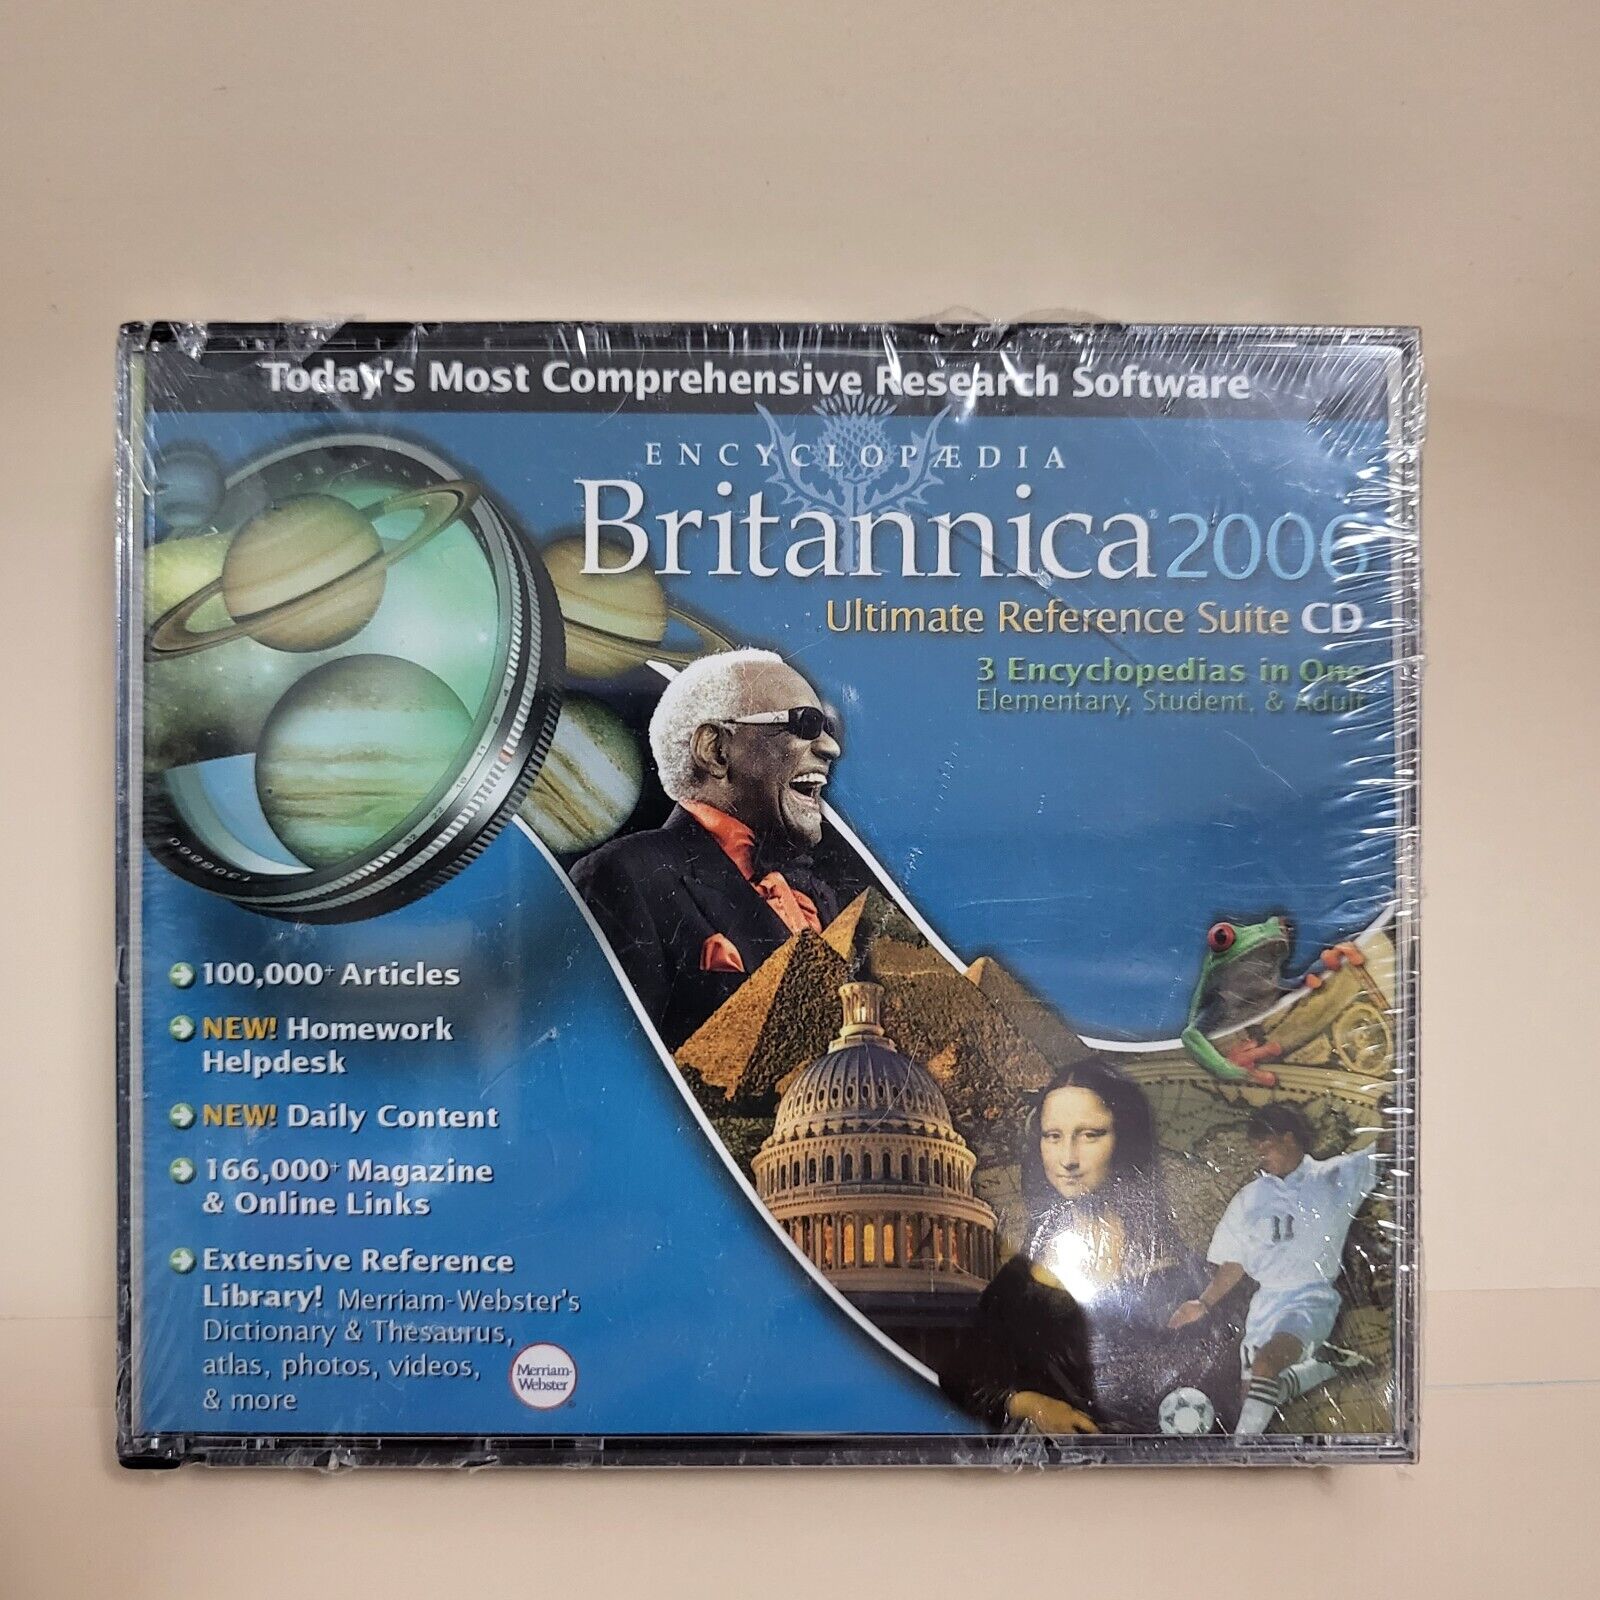 ENCYCLOPEDIA BRITANNICA 2006 Ultimate Reference Suite CD